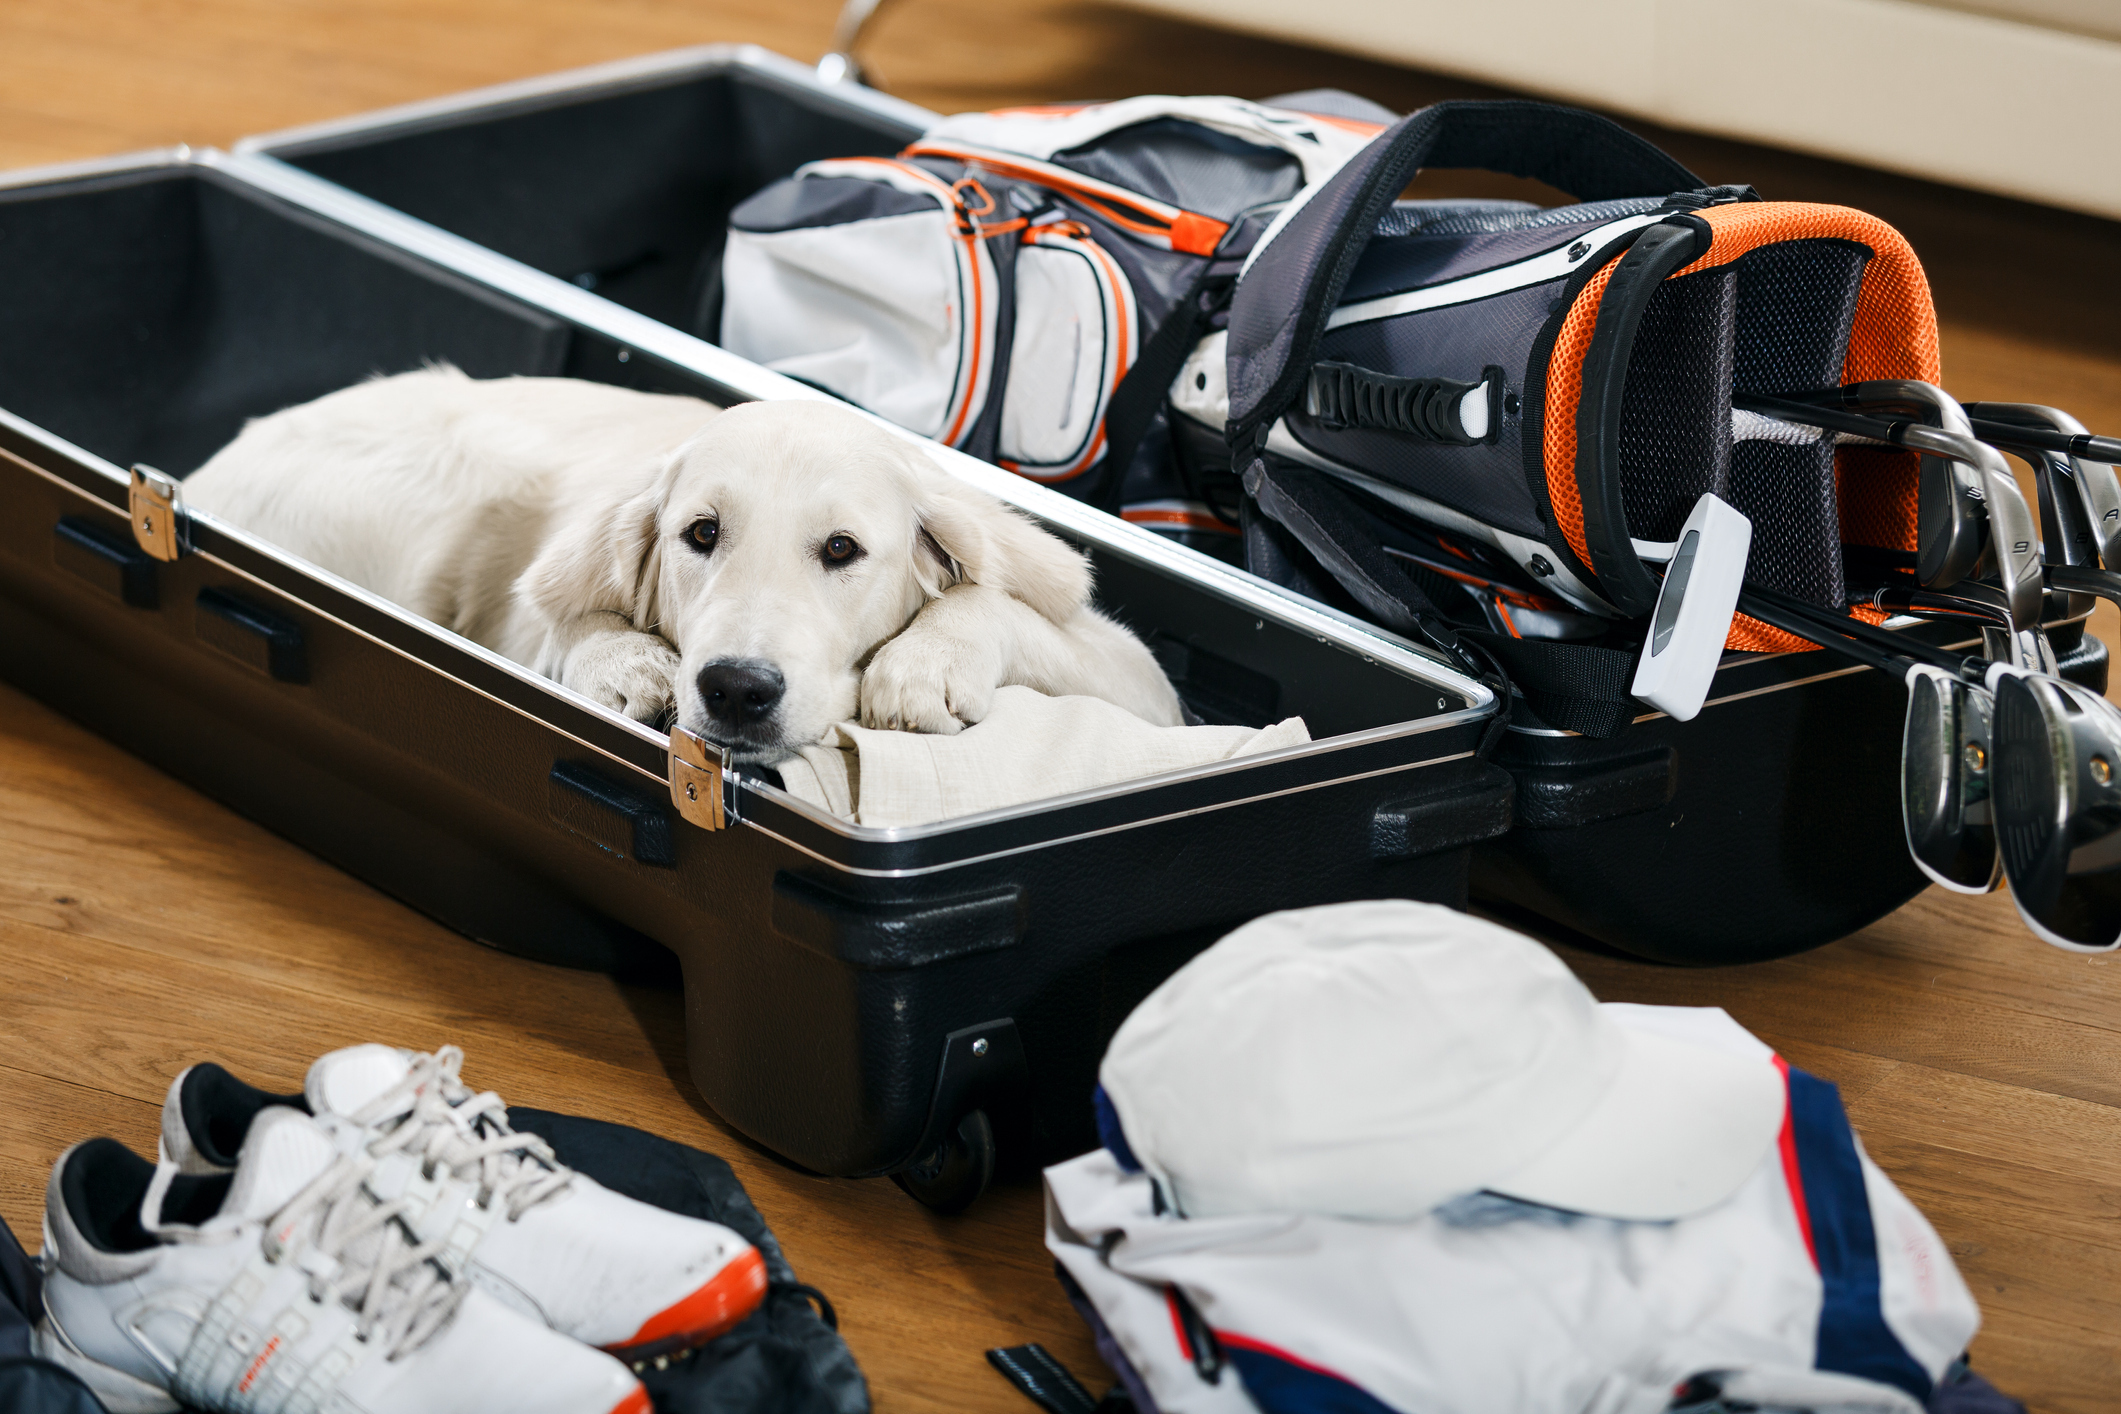 Golf travel bag packed with clubs and dog